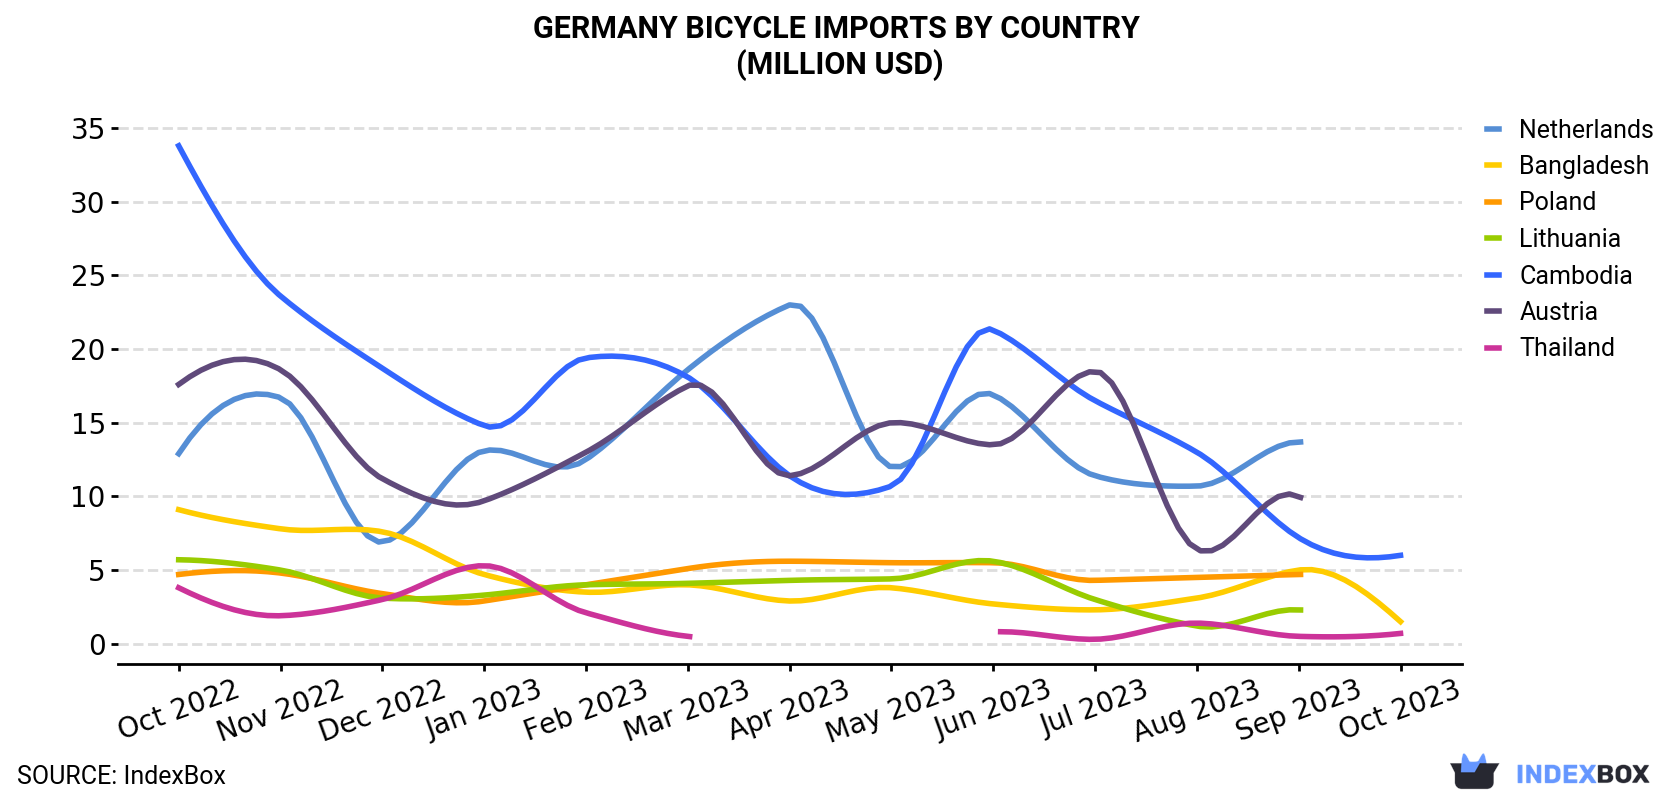 Germany Bicycle Imports By Country (Million USD)